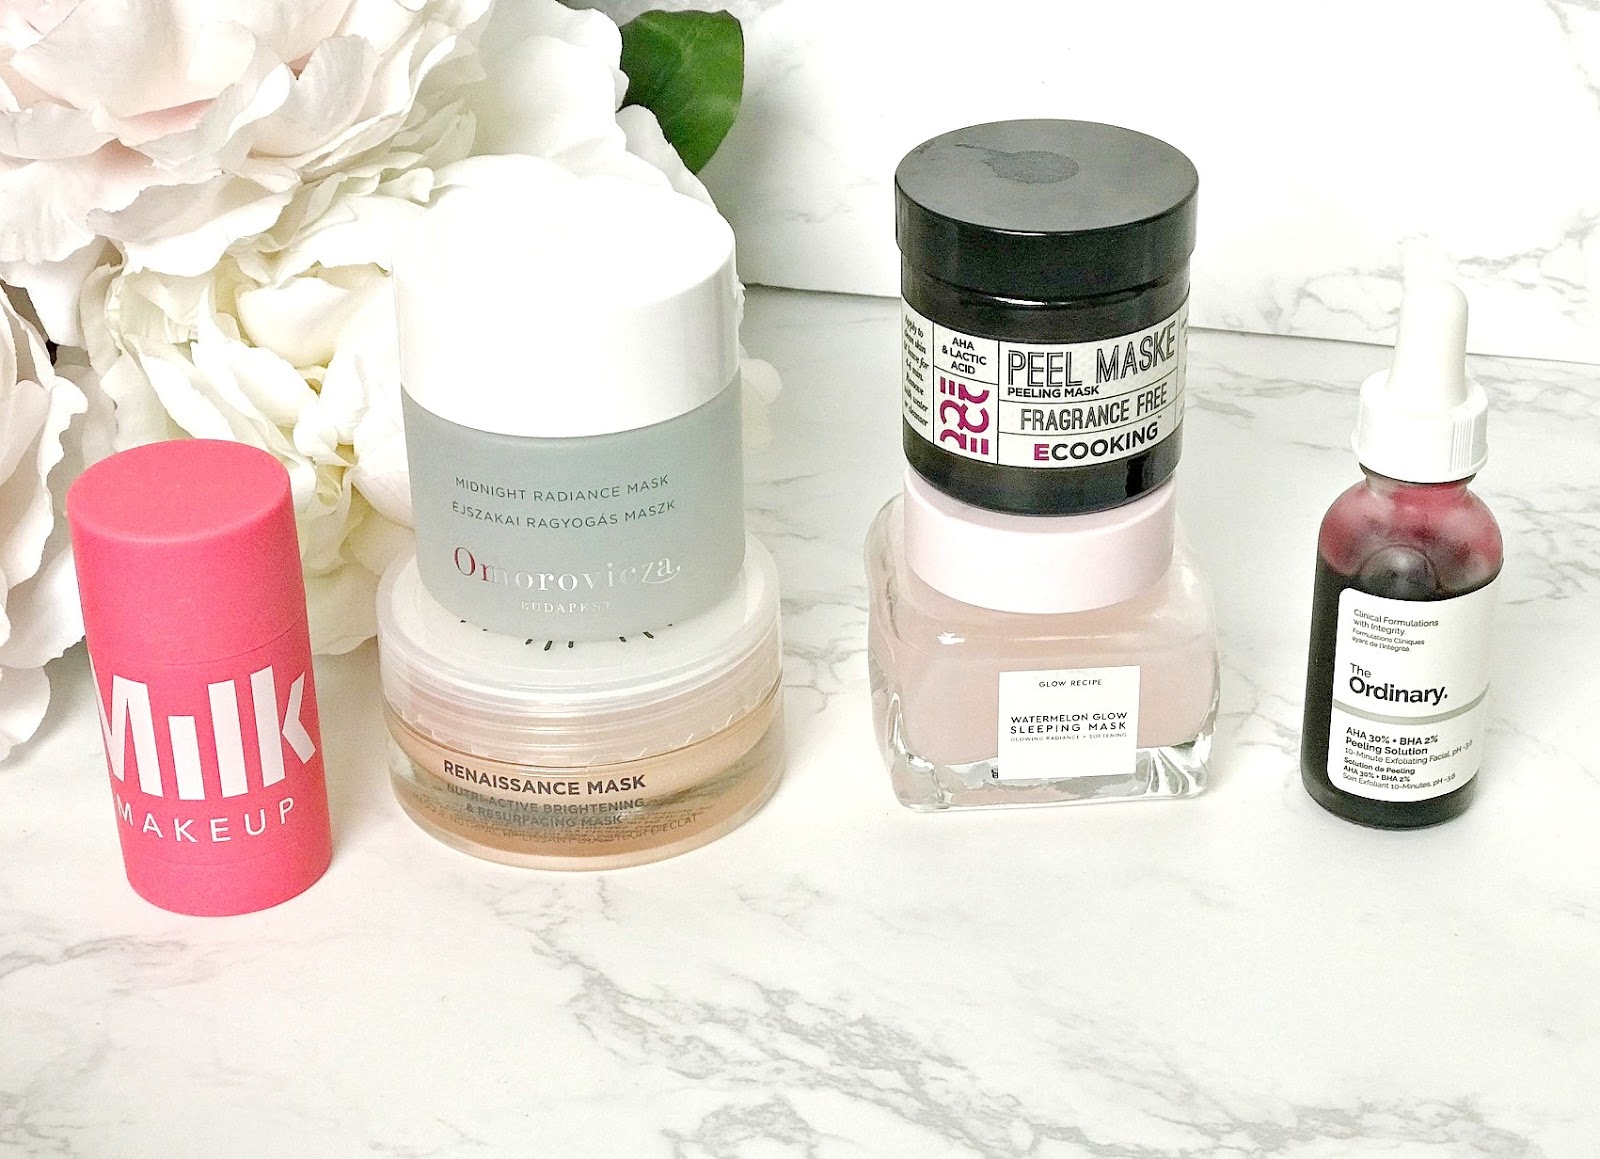 Cult Beauty Discount Code, Omorovicza Midnight Radiance Mask Review, Oskia Renaissance Mask Review, Ecooking Peeling Mask Review, Milk Makeup Watermelon Brightening Mask Review, Glow Recipe Watermelon Sleeping Mask Review